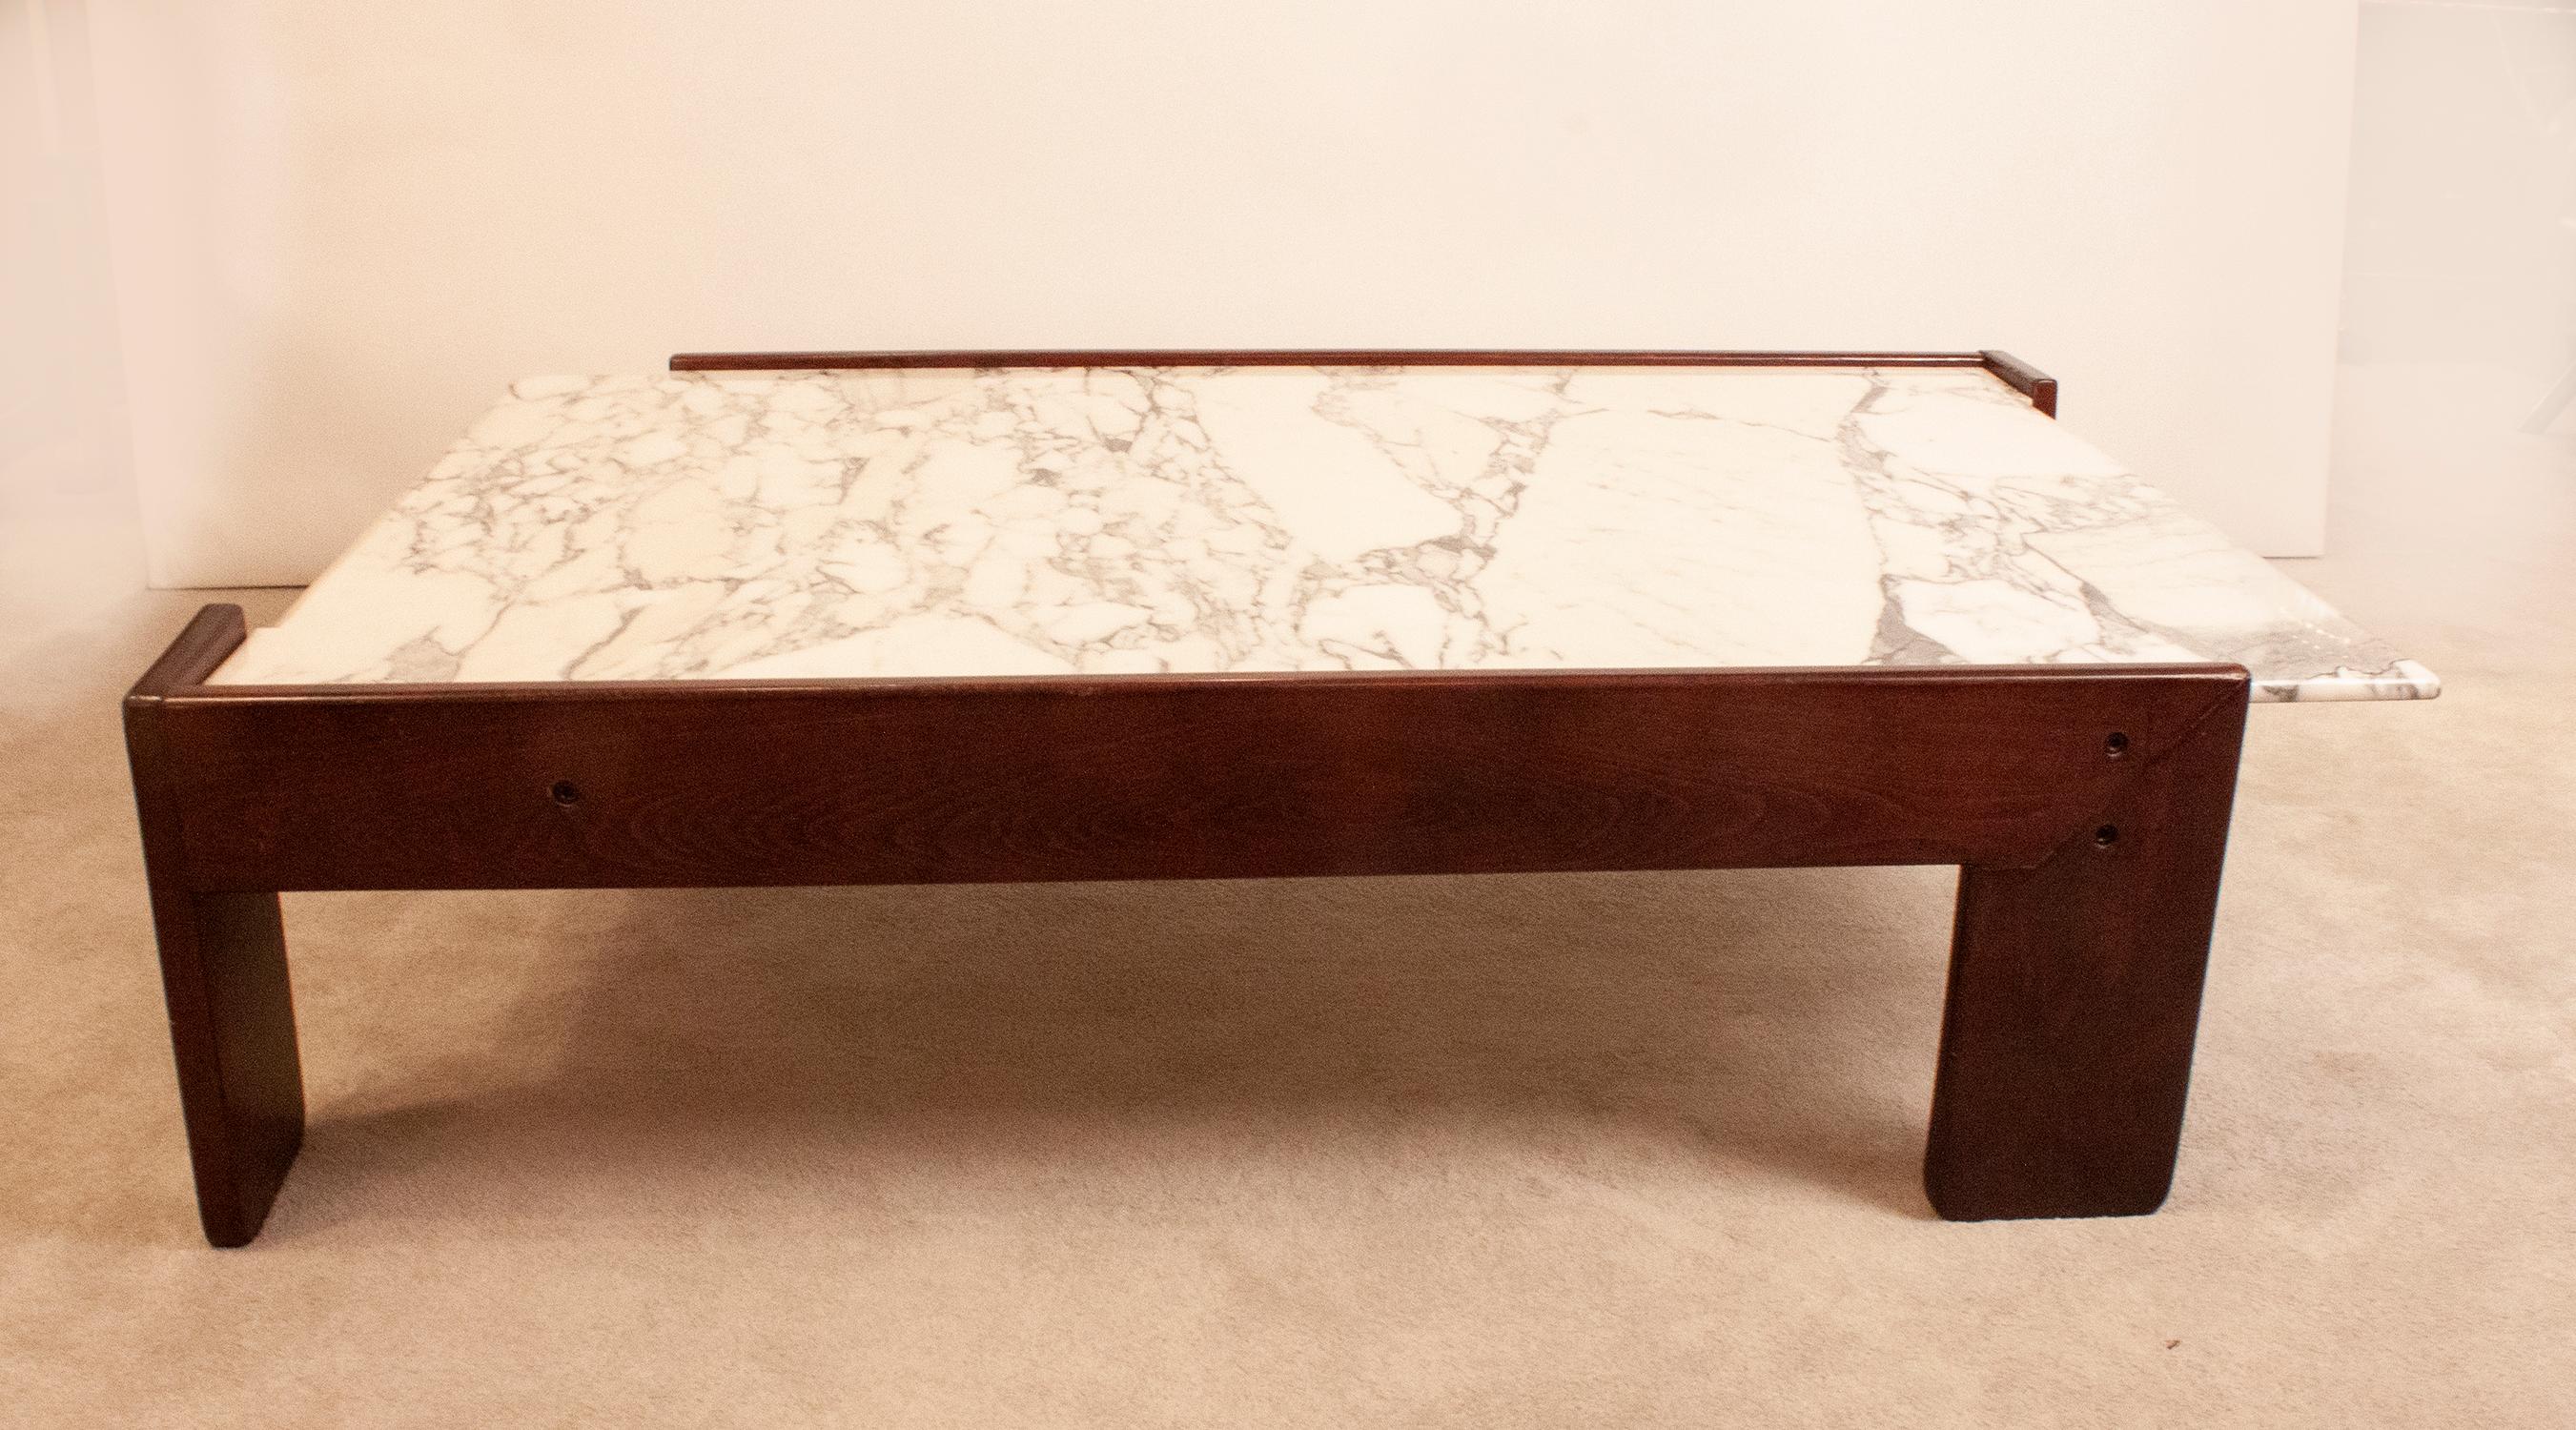 Spanish Coffee Table, Wood and Marble Designed by Antonio Moragas, Spain, 1970's For Sale